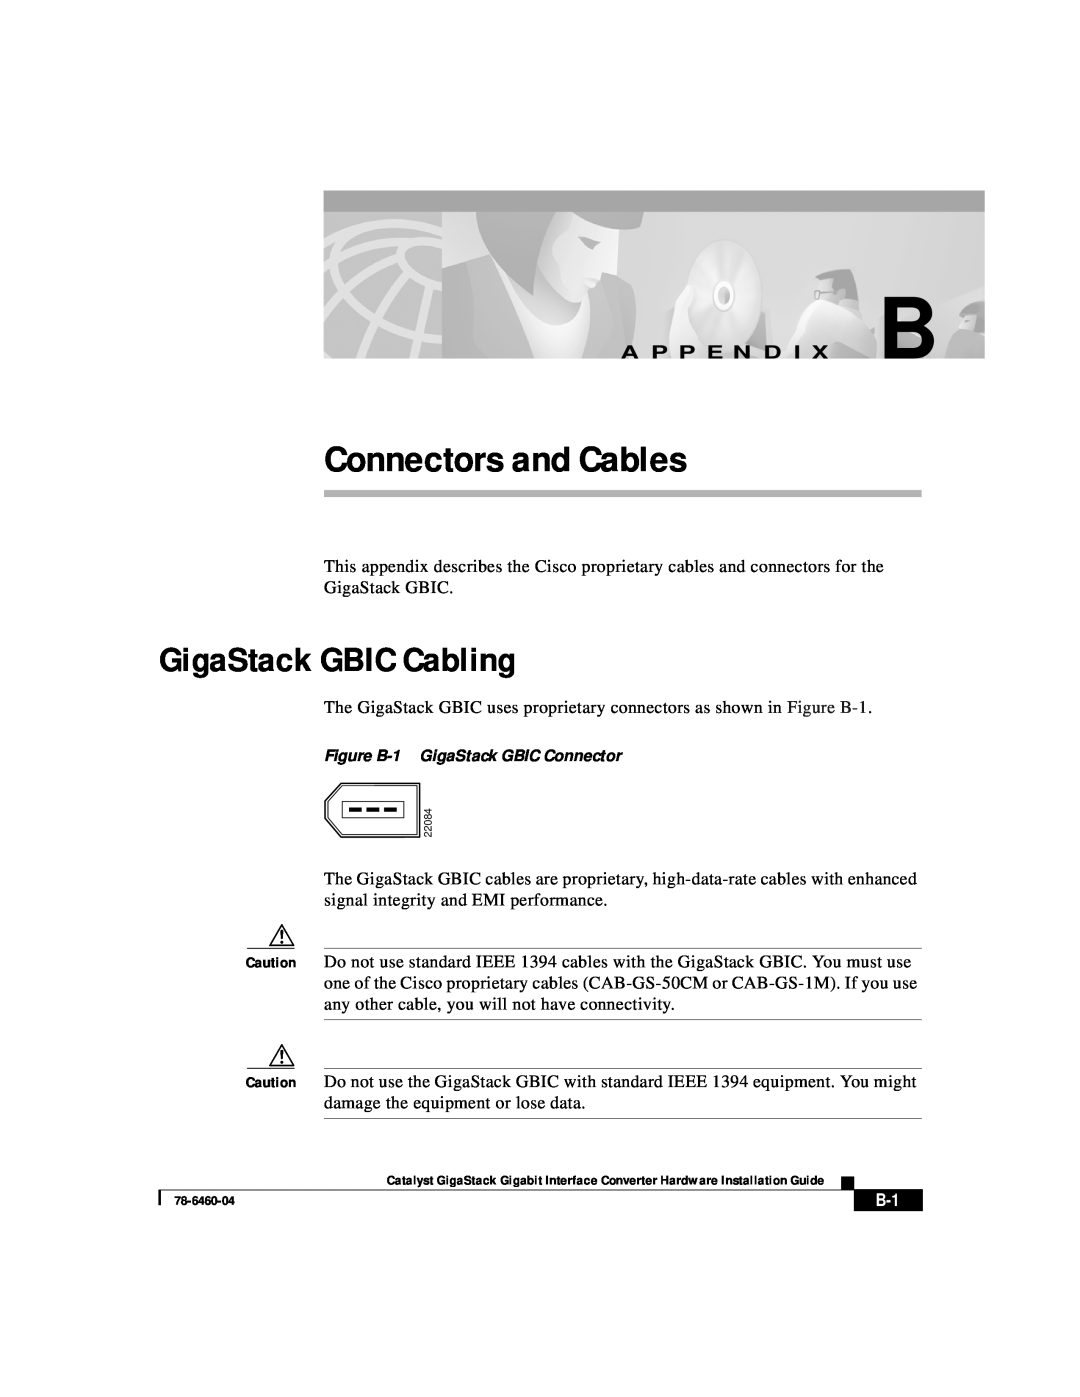 Cisco Systems WS-X3500-XL manual Connectors and Cables, GigaStack GBIC Cabling, A P P E N D I X B 